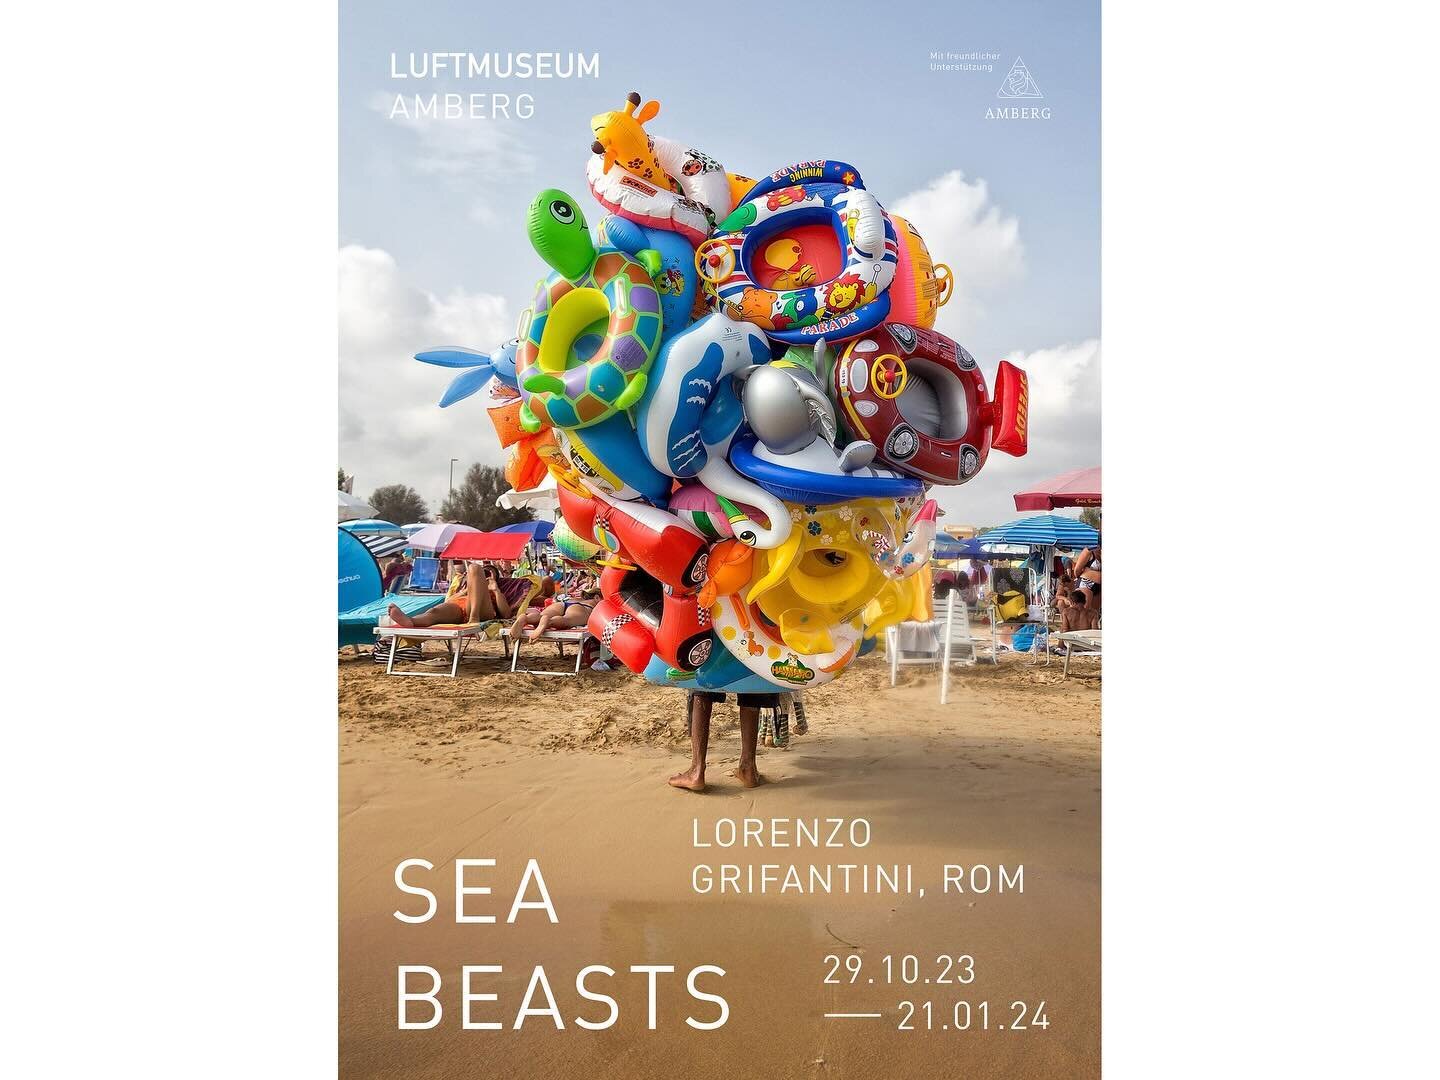 🌊Exciting News! 🌊 I'm thrilled to announce my upcoming exhibition, 'Sea Beasts', at the beautiful @Luftmuseum in Amberg, Germany! Dive into a world of artificial marine wonders from October 29th to January 21st. If you're in the area, join us for t